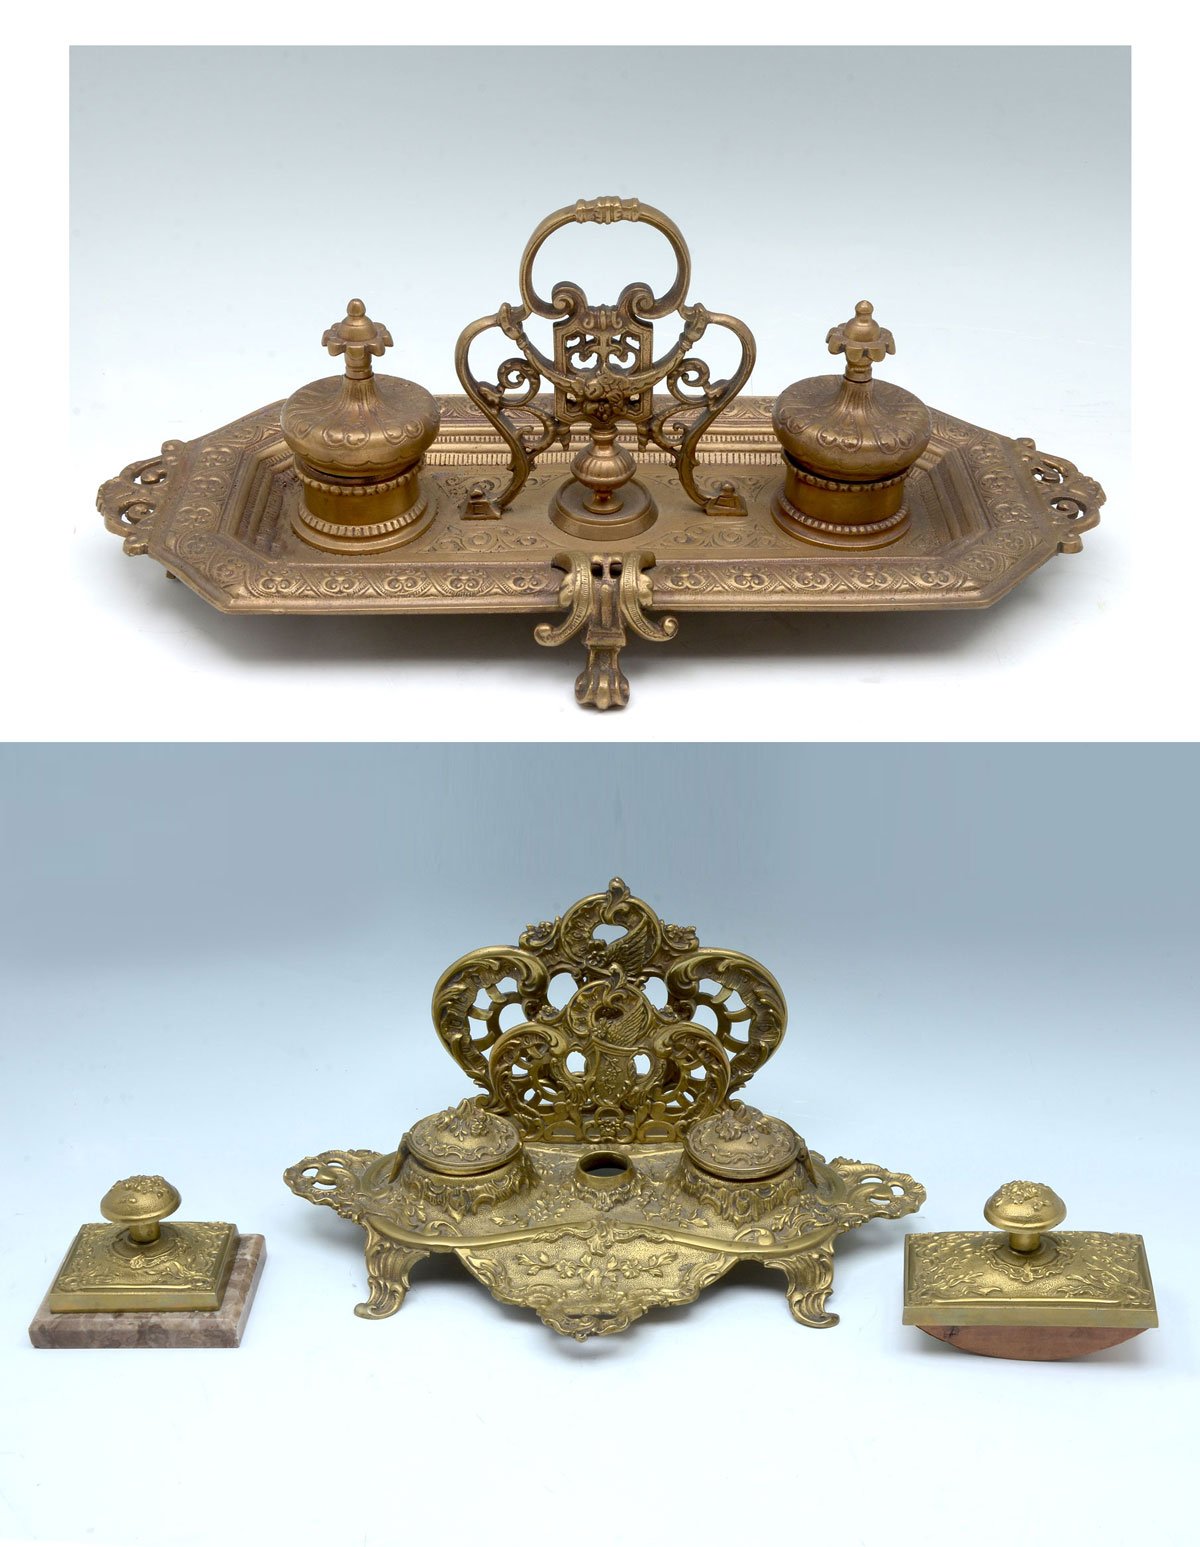 2 ANTIQUE INKWELL SETS: 1) Comprising;